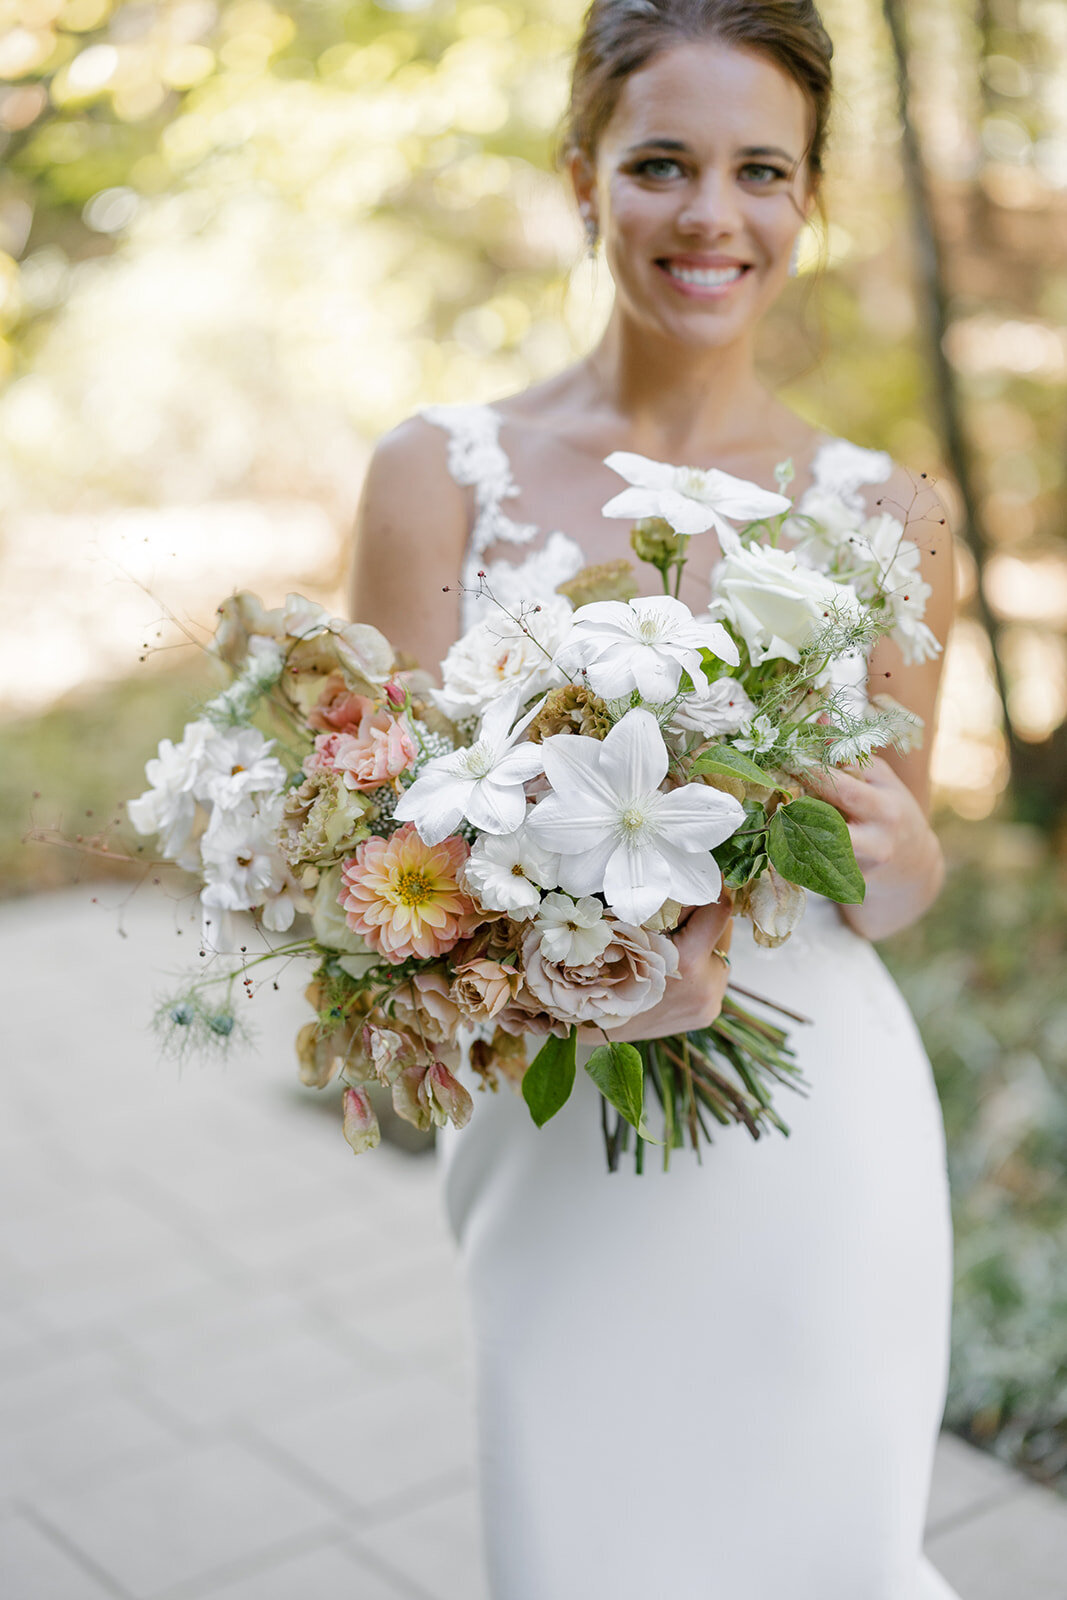 Fall bridal bouquet with lush autumnal colors of mauve, dusty pink, cream, white, peach, taupe, and green. Florals of dahlias, roses, clematis, lisianthus, and natural greenery. Fall wedding in Raleigh, NC. Design by Rosemary and Finch Floral Design in Nashville, TN.